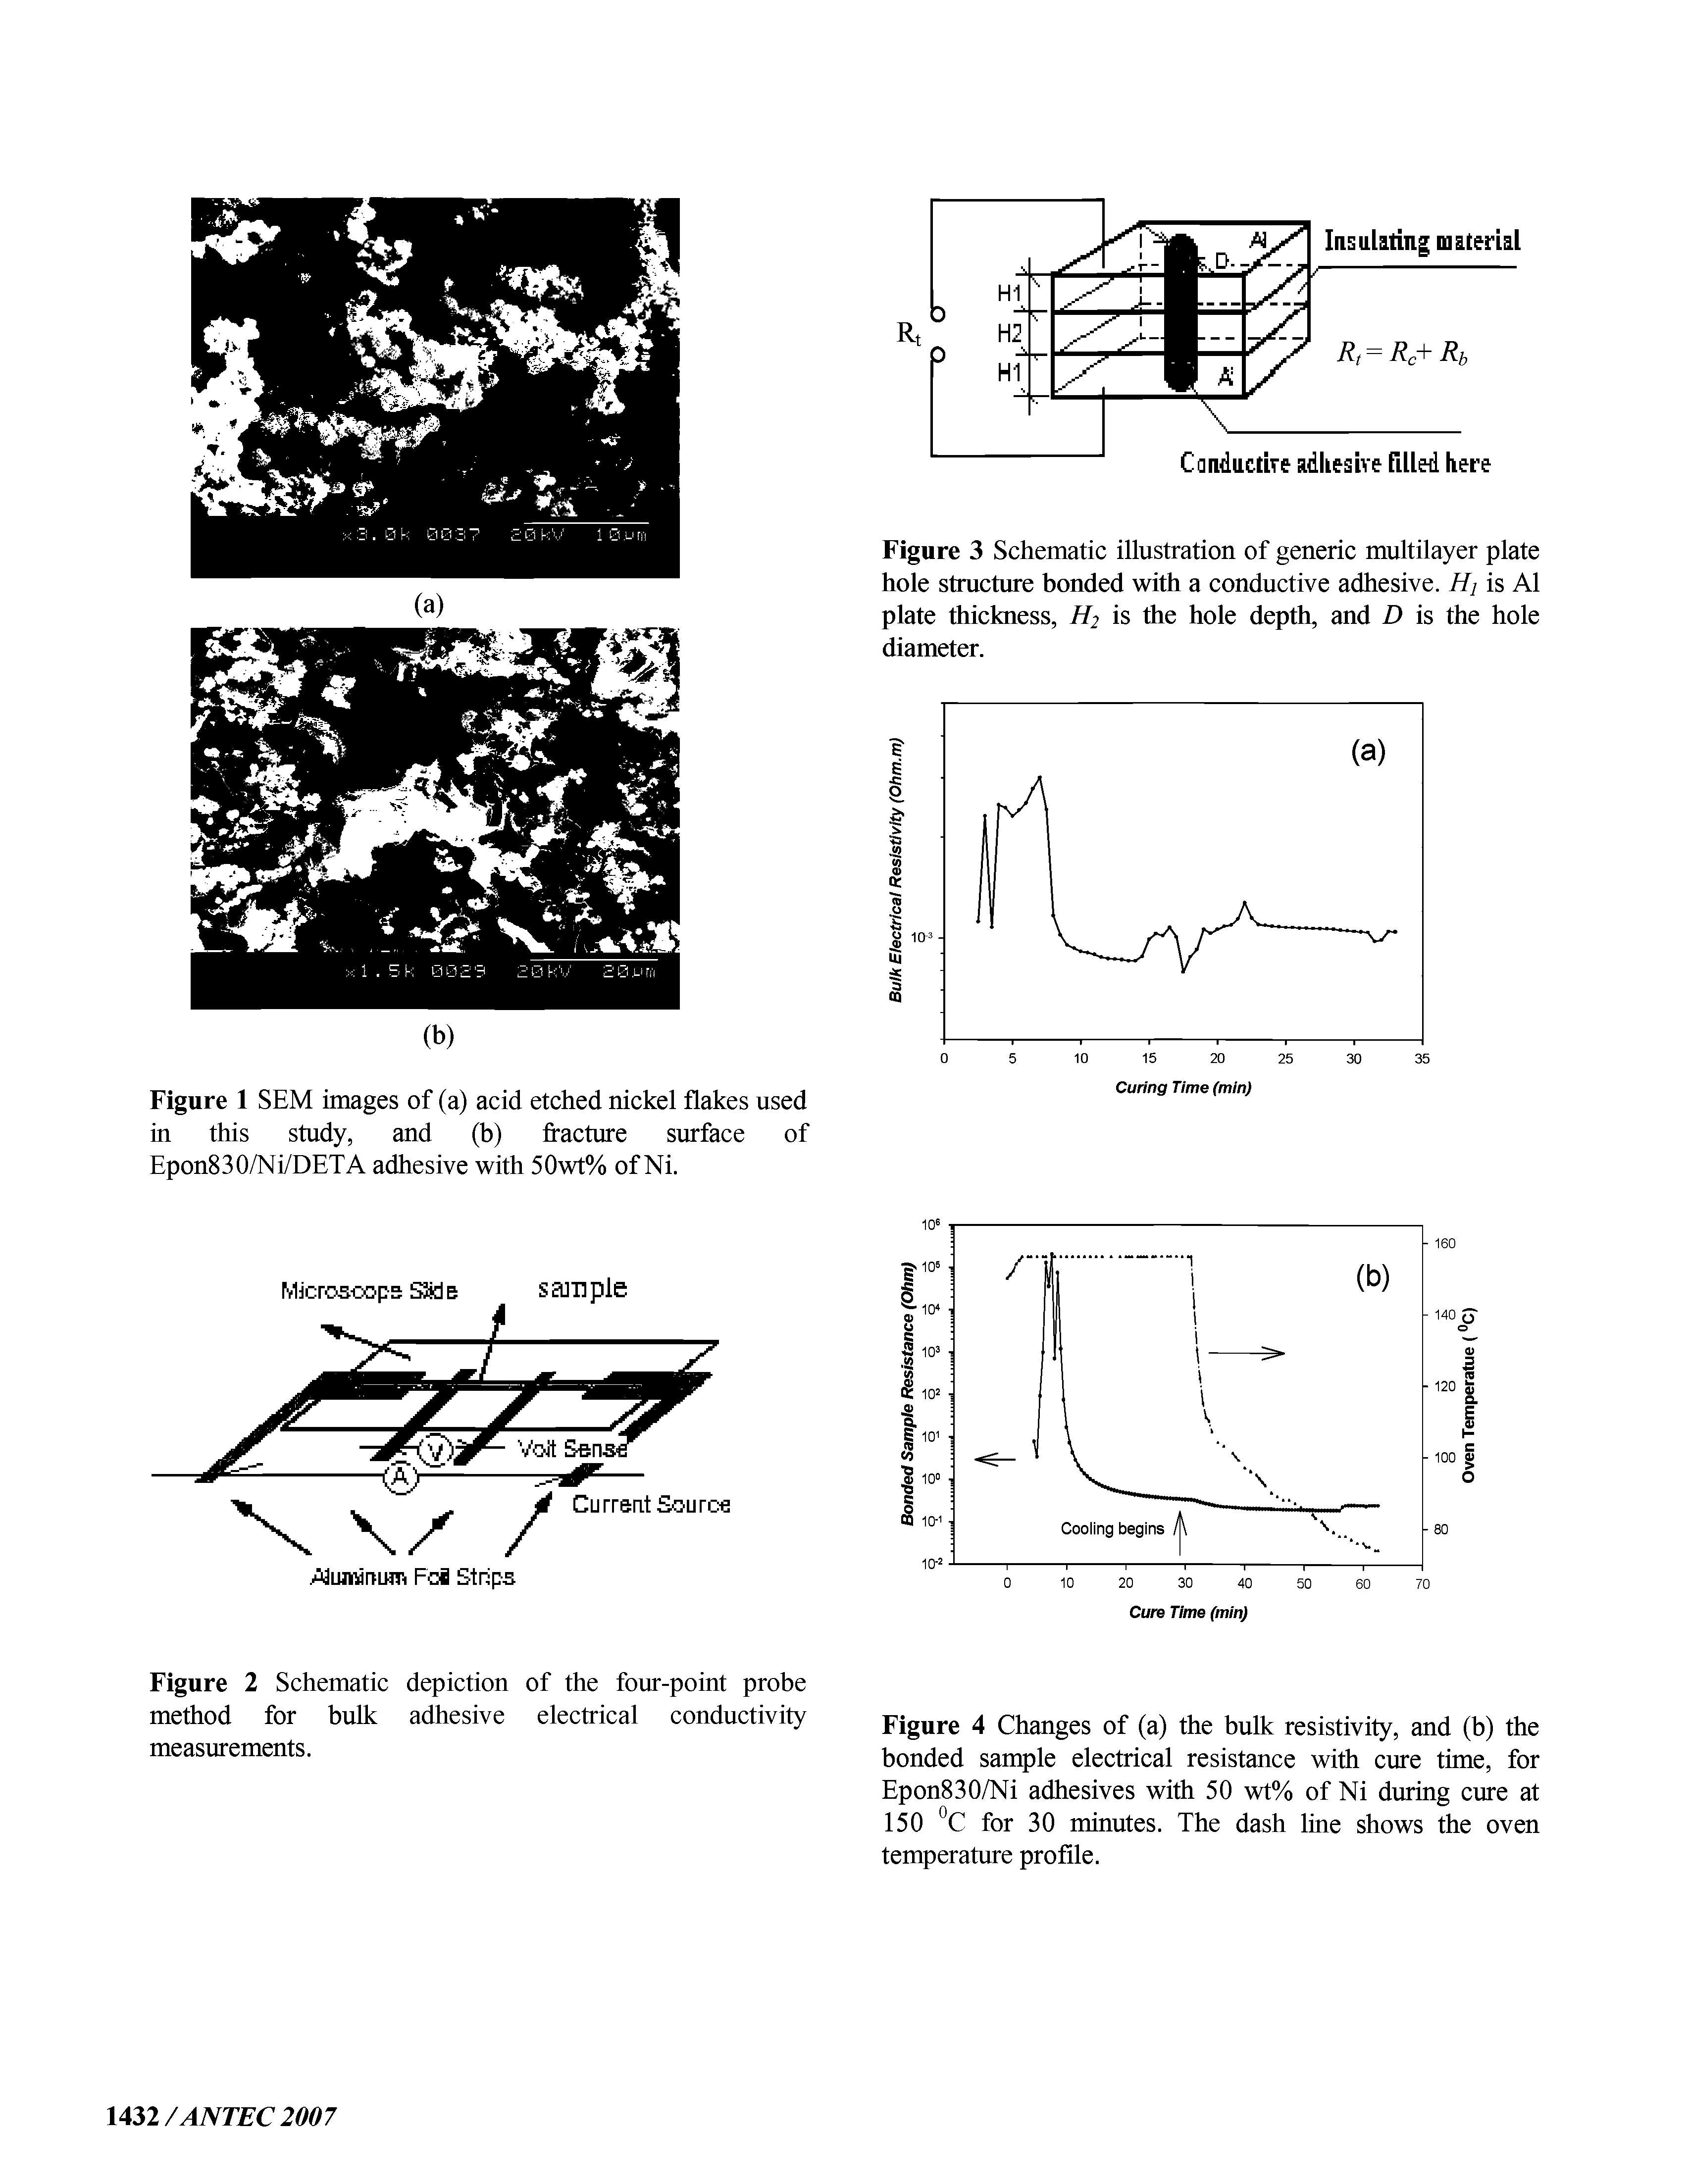 Figure 4 Changes of (a) the bulk resistivity, and (b) the bonded sample electrical resistance with cure time, for Epon830/Ni adhesives with 50 wt% of Ni during cure at 150 °C for 30 minutes. The dash line shows the oven temperature profile.